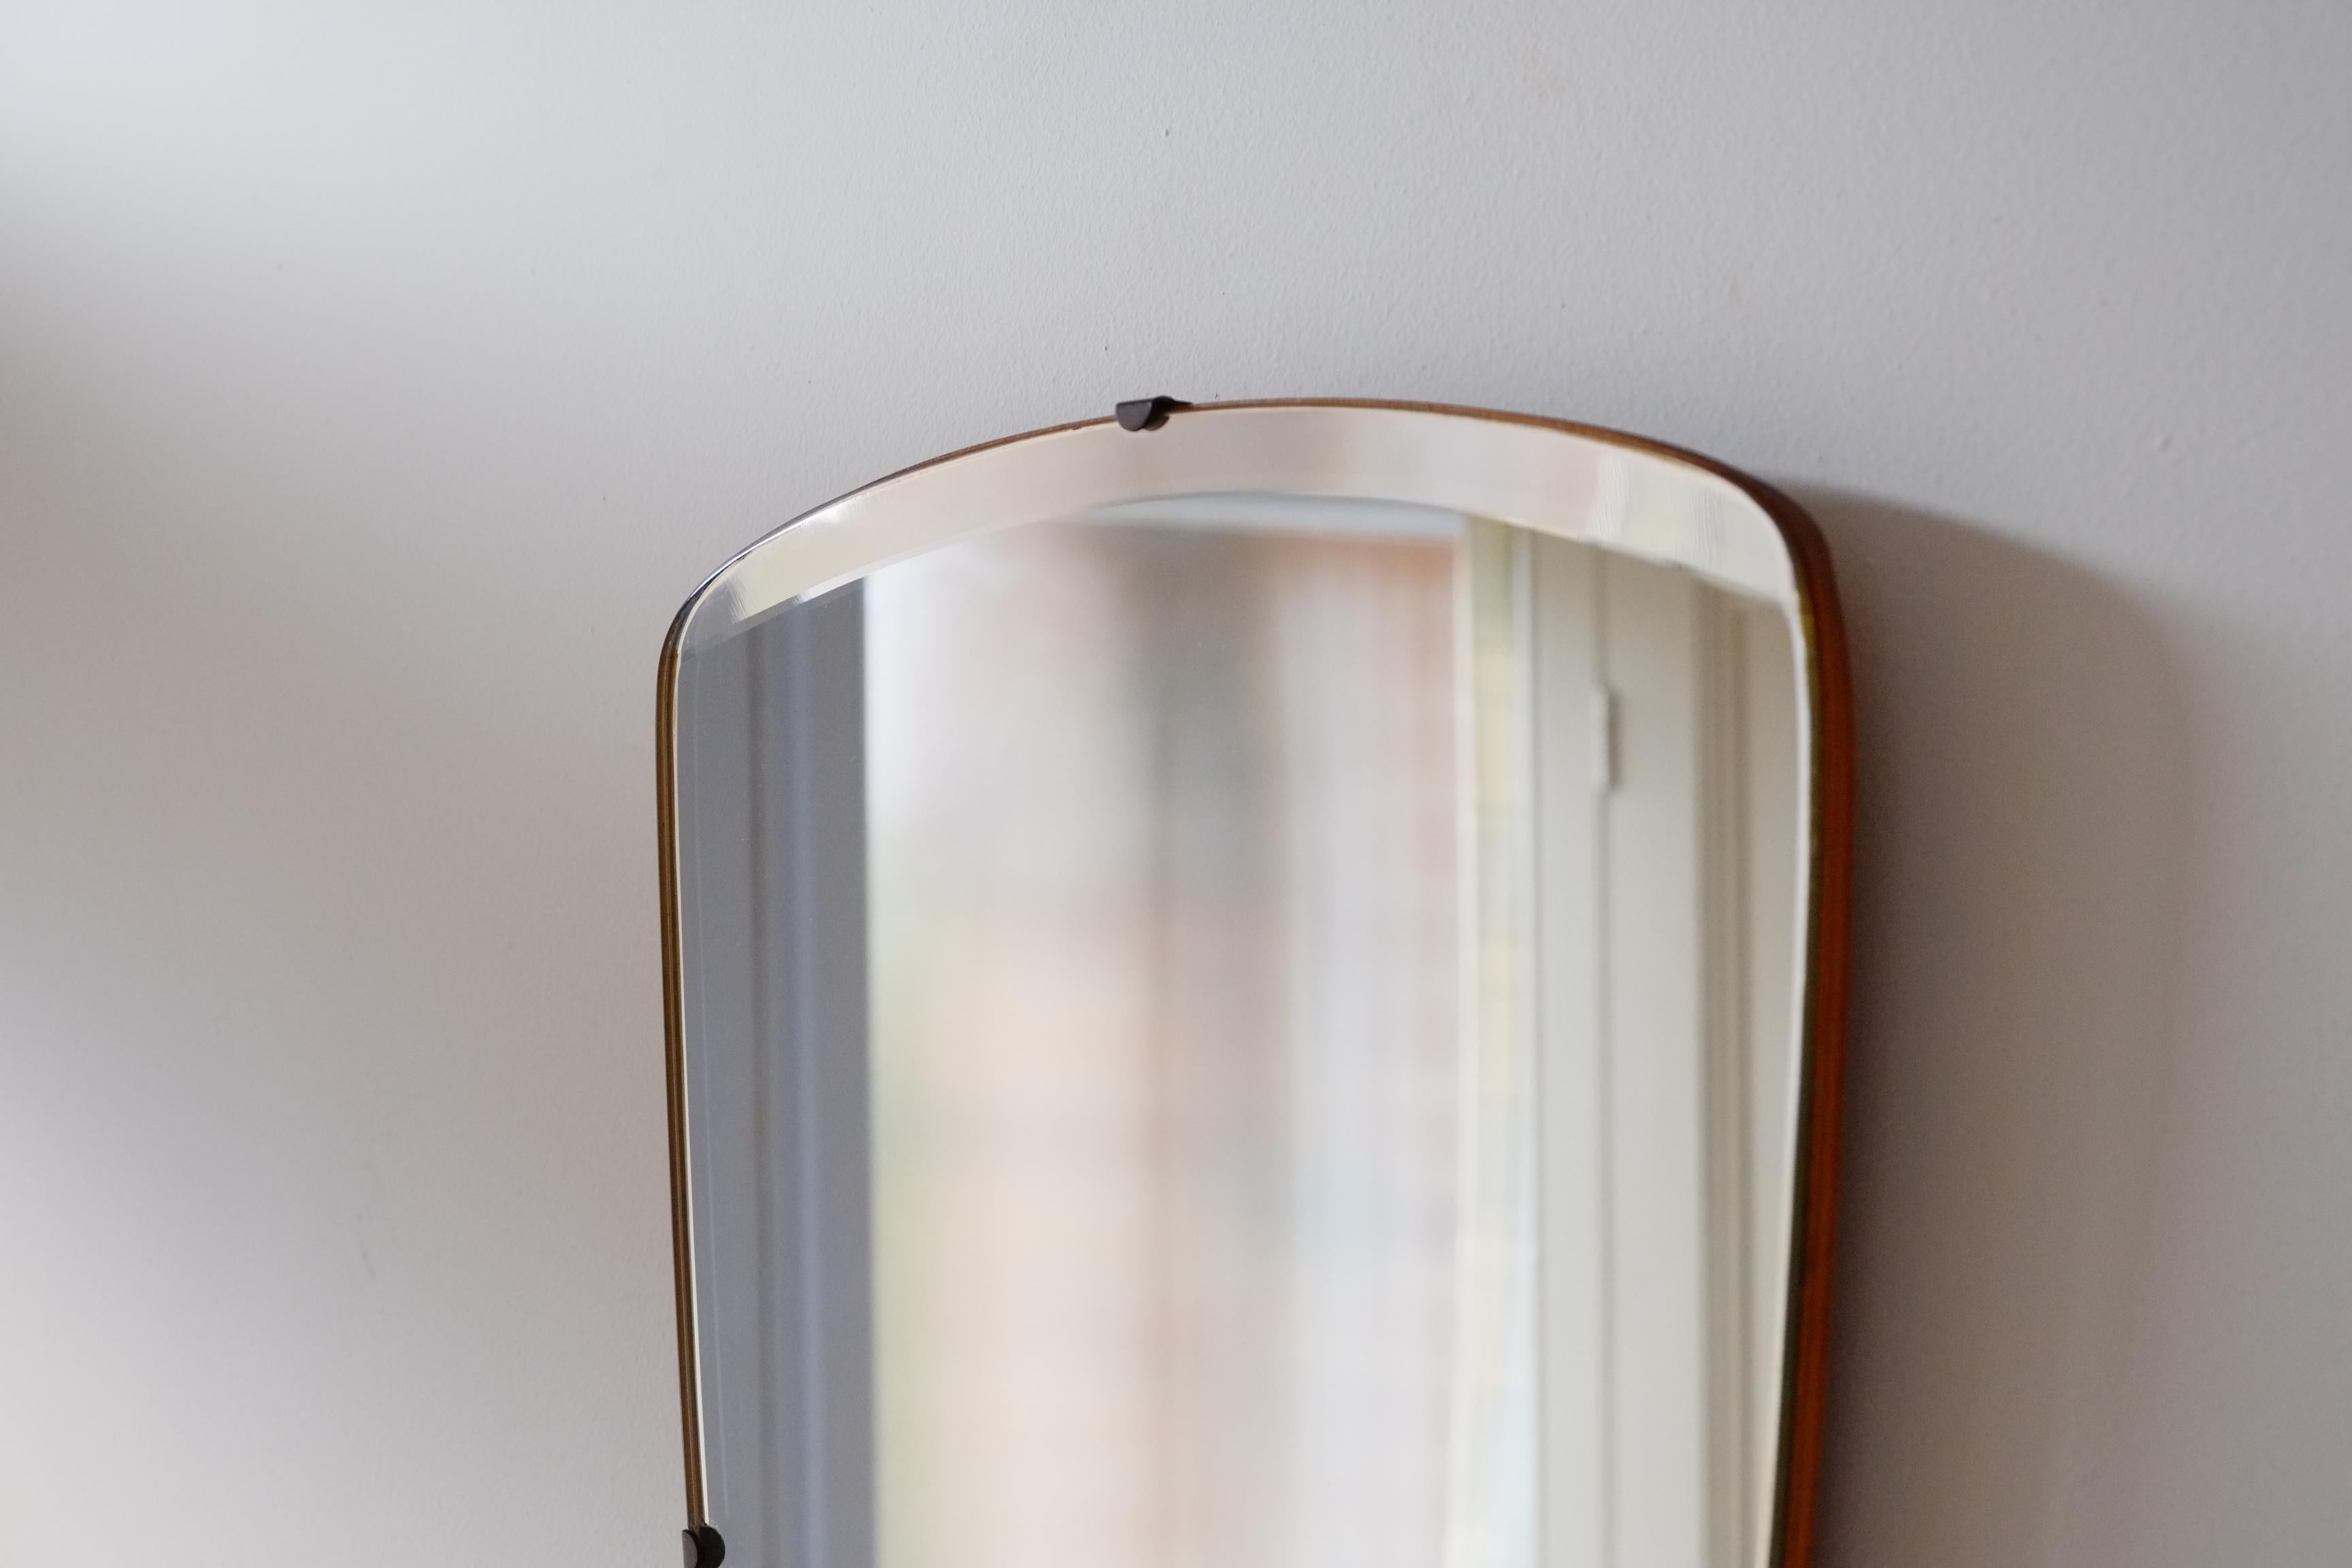 Rare 1950's Mid Century Modern Triangular Wedge Shaped Mirror In Good Condition For Sale In Leicester, GB